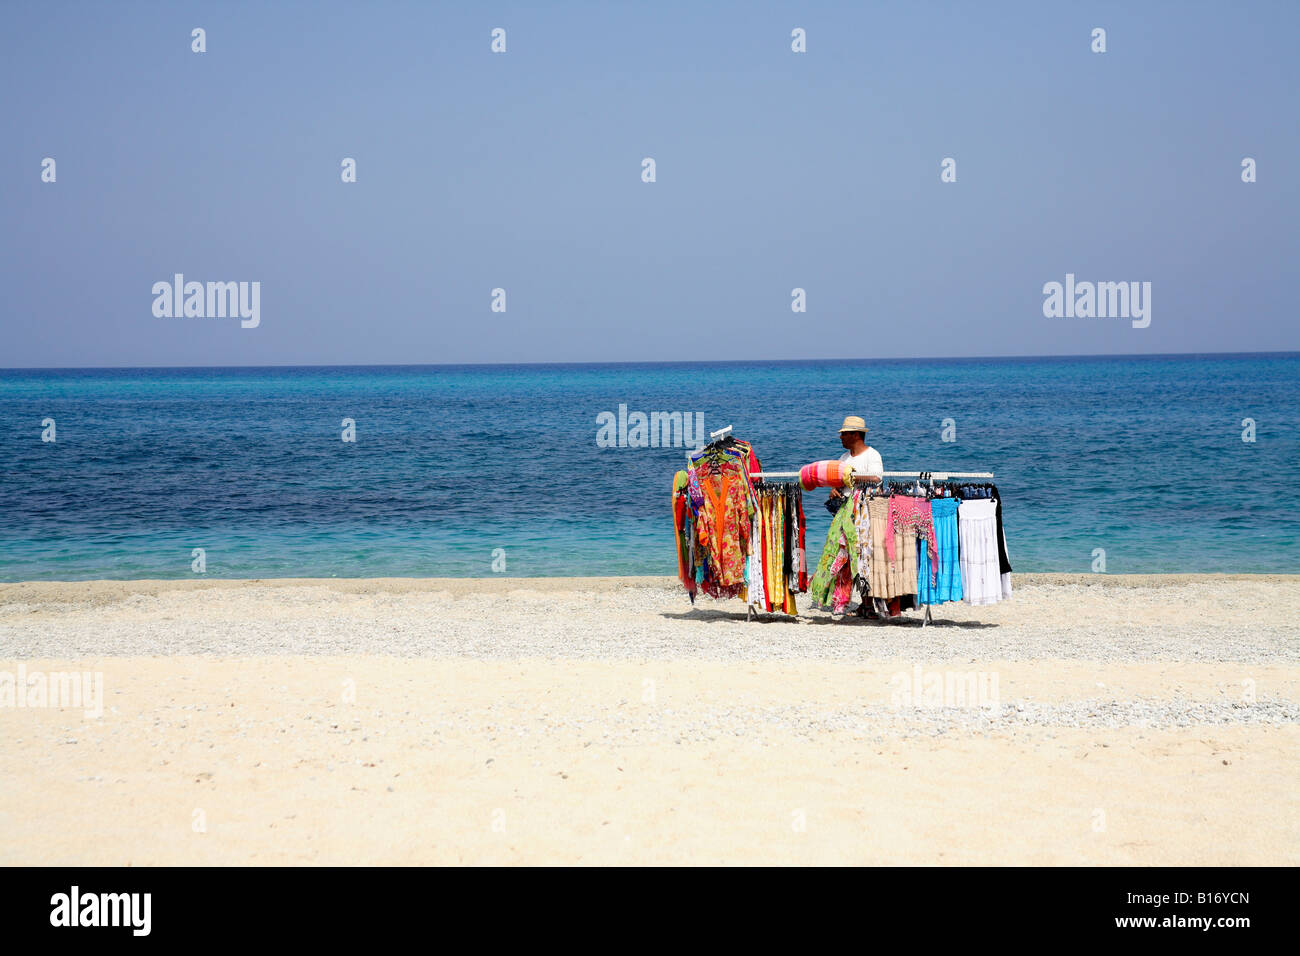 a beach seller stops to sell his goods on a hot sunny day in italy Stock Photo